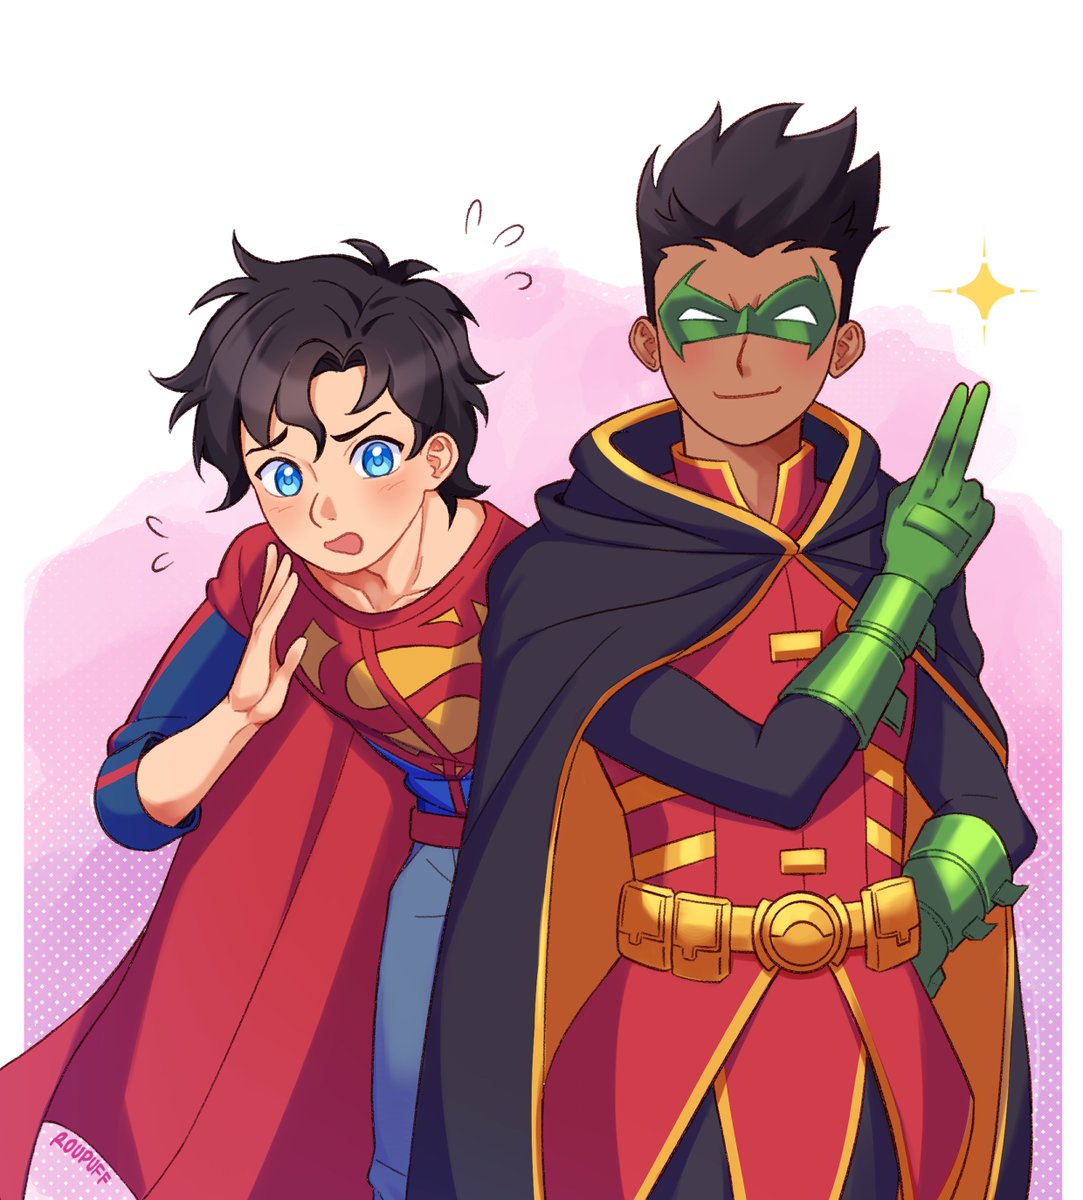 'i think we're in a trouble, Damian!'
#supersons #jondami #jonkent #damianwayne